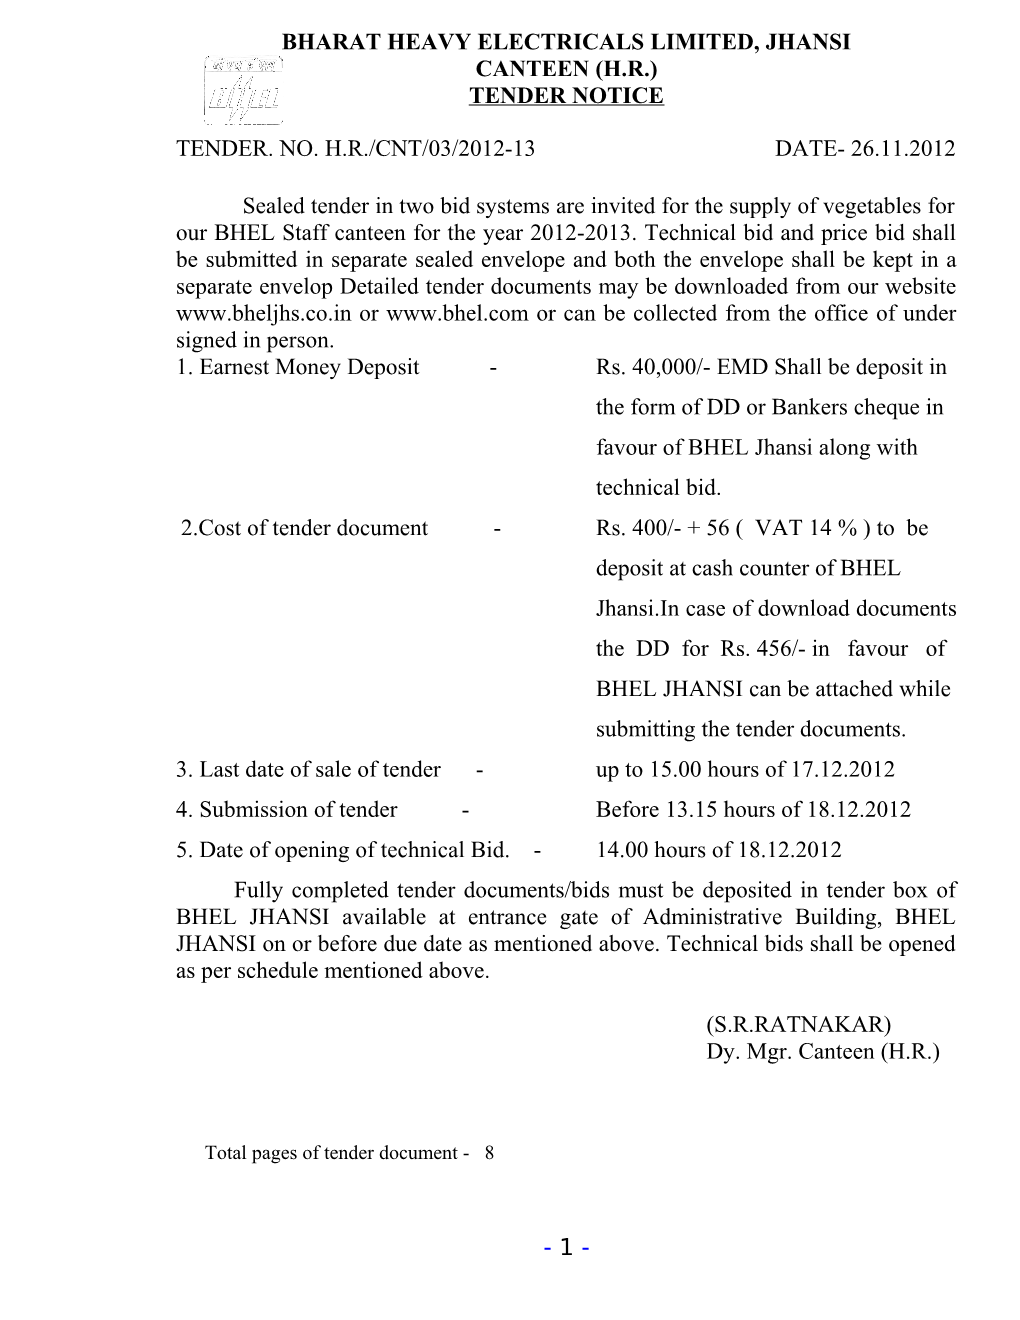 Subject : Annual Contract for the Supply of Vegetables for The